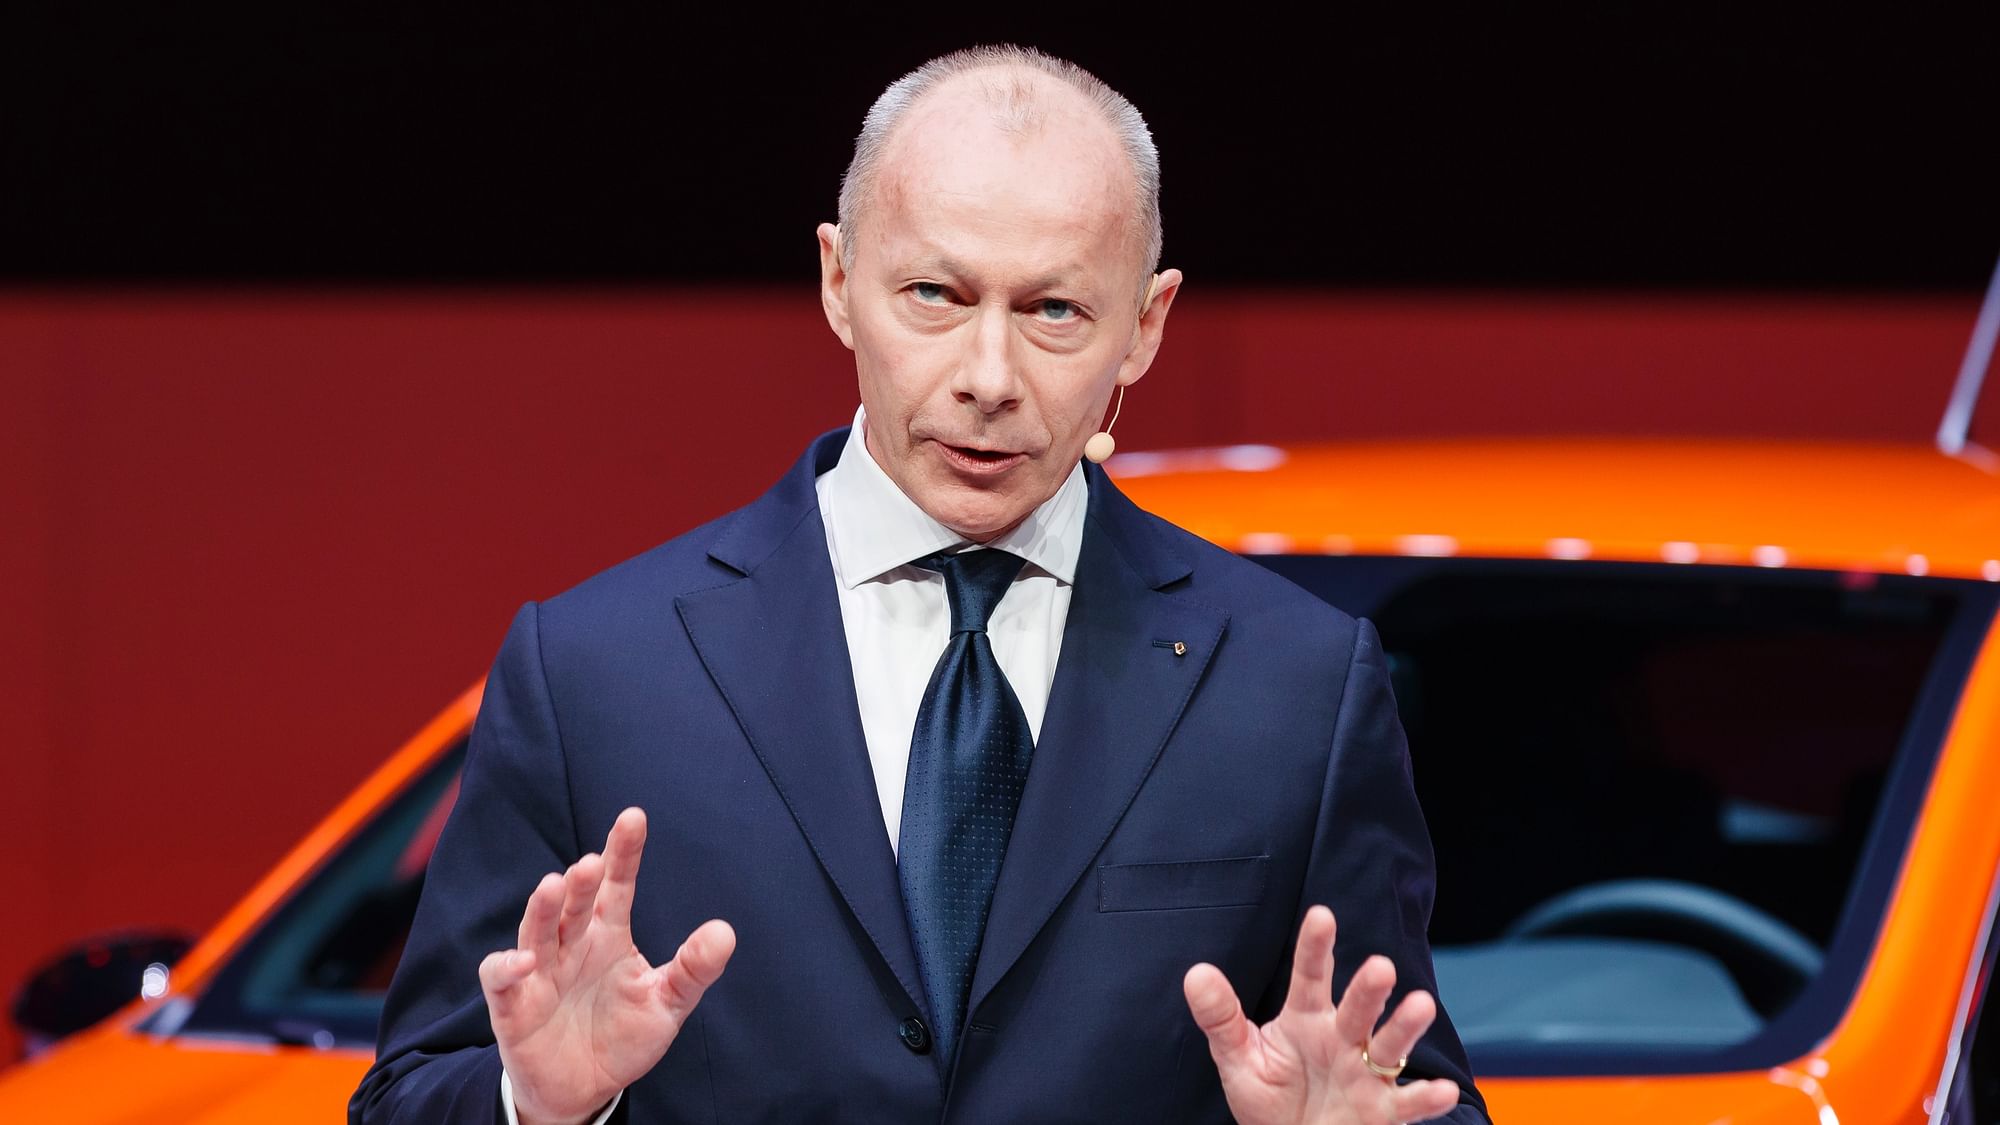 French carmaker Renault has dismissed its chief executive officer, overhauling its leadership once again after the jailing of its previous chairman and CEO. The decision by the board on 11, October 2019, to dismiss Thierry Bollore was effective immediately.